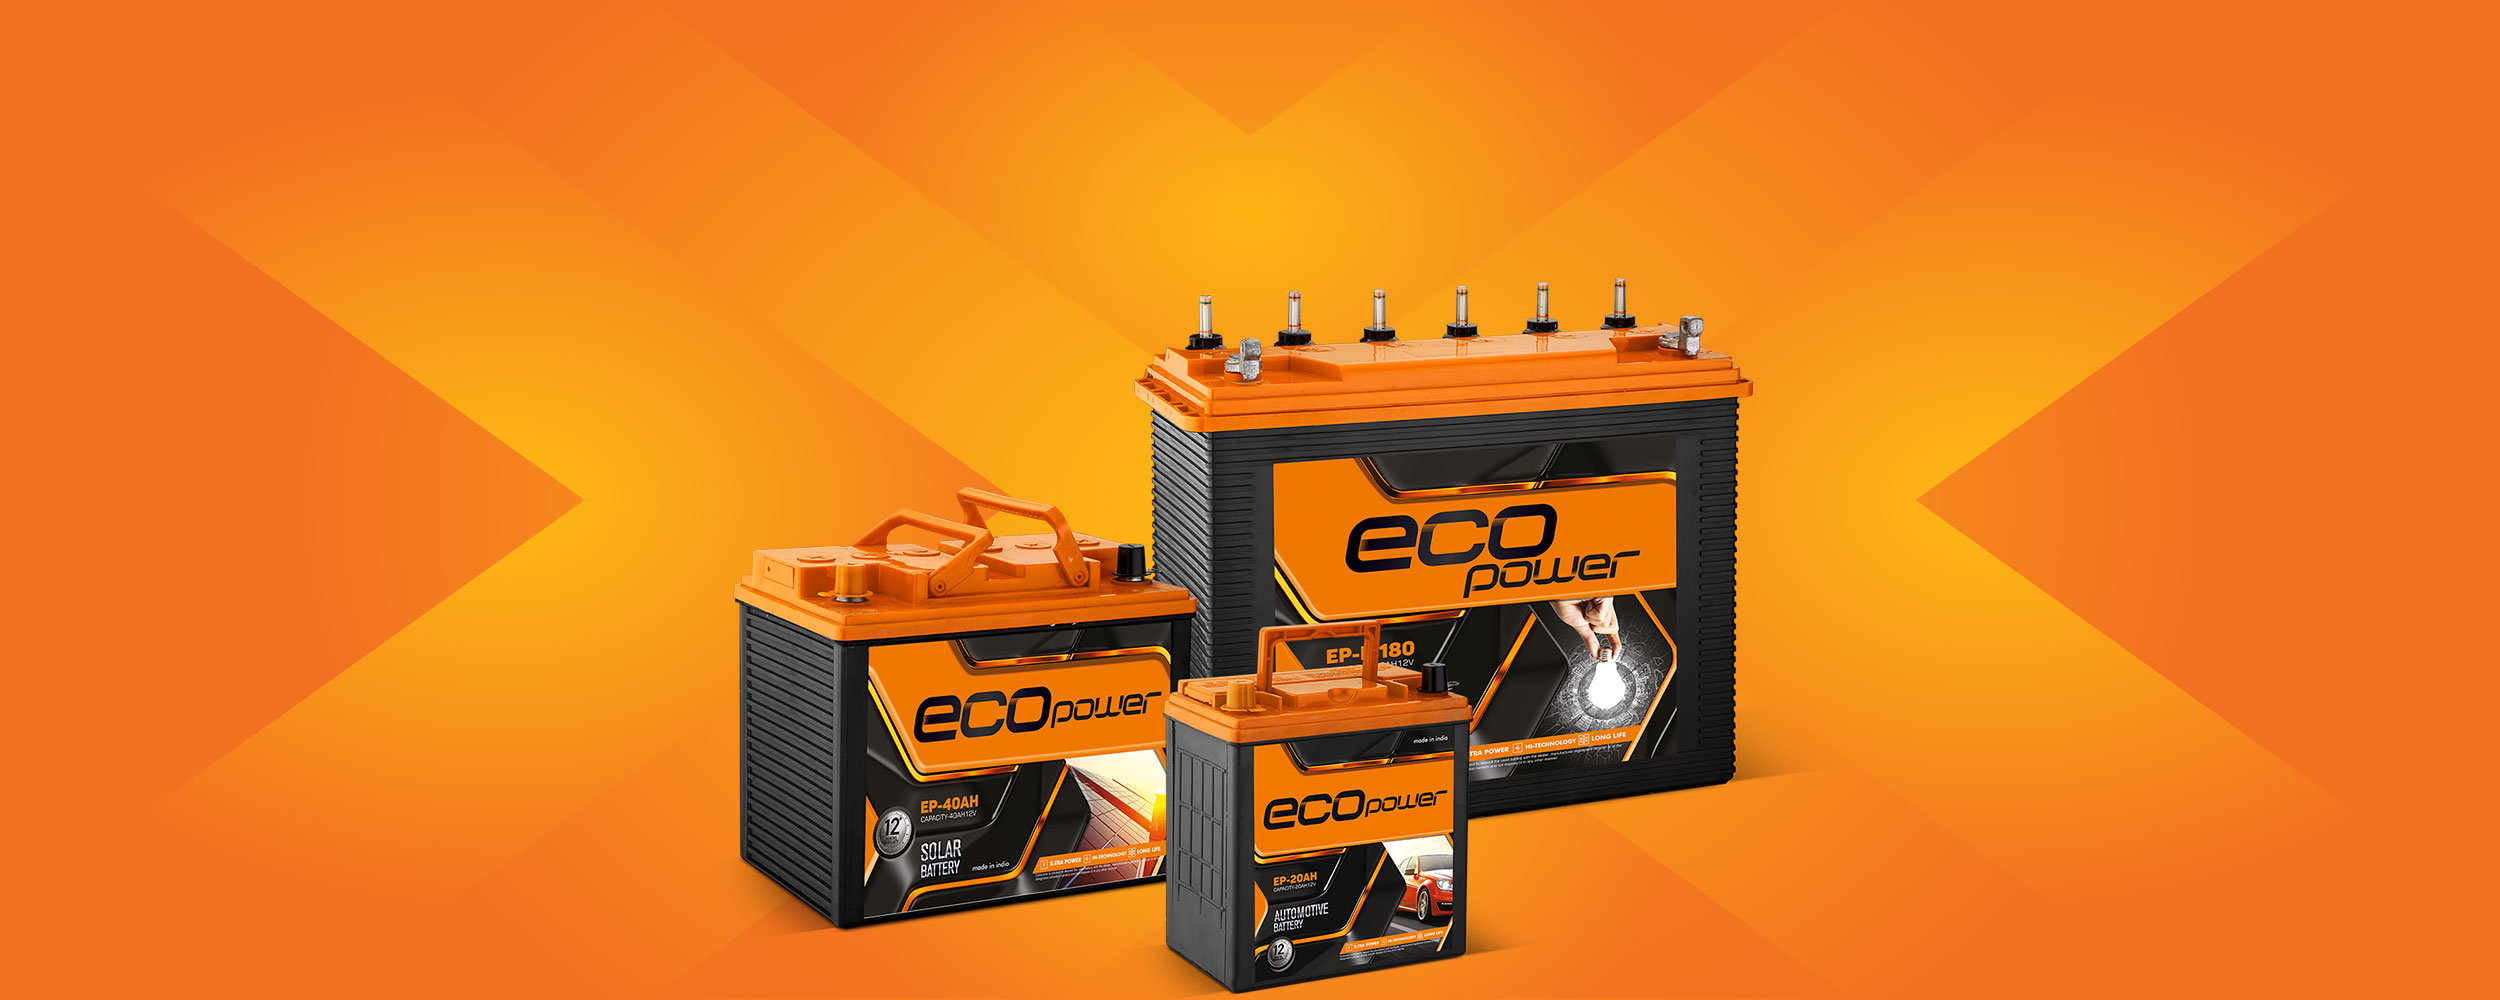 Lead-acid automotive battery with advanced technologies- The best options for car owners